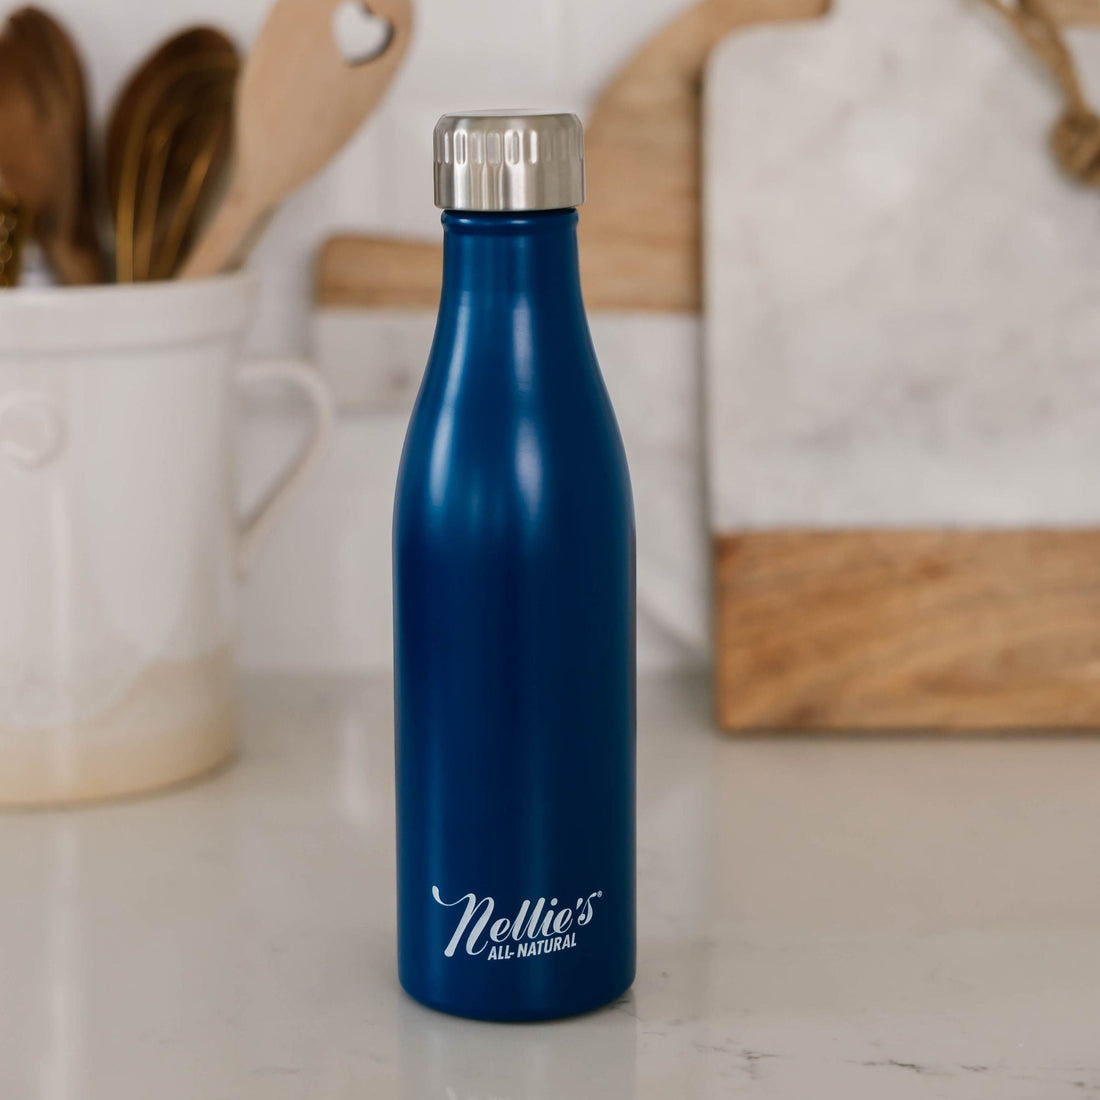 B 16oz blue Nellie's branded stainless steel water bottle safe for hot or cold beverages